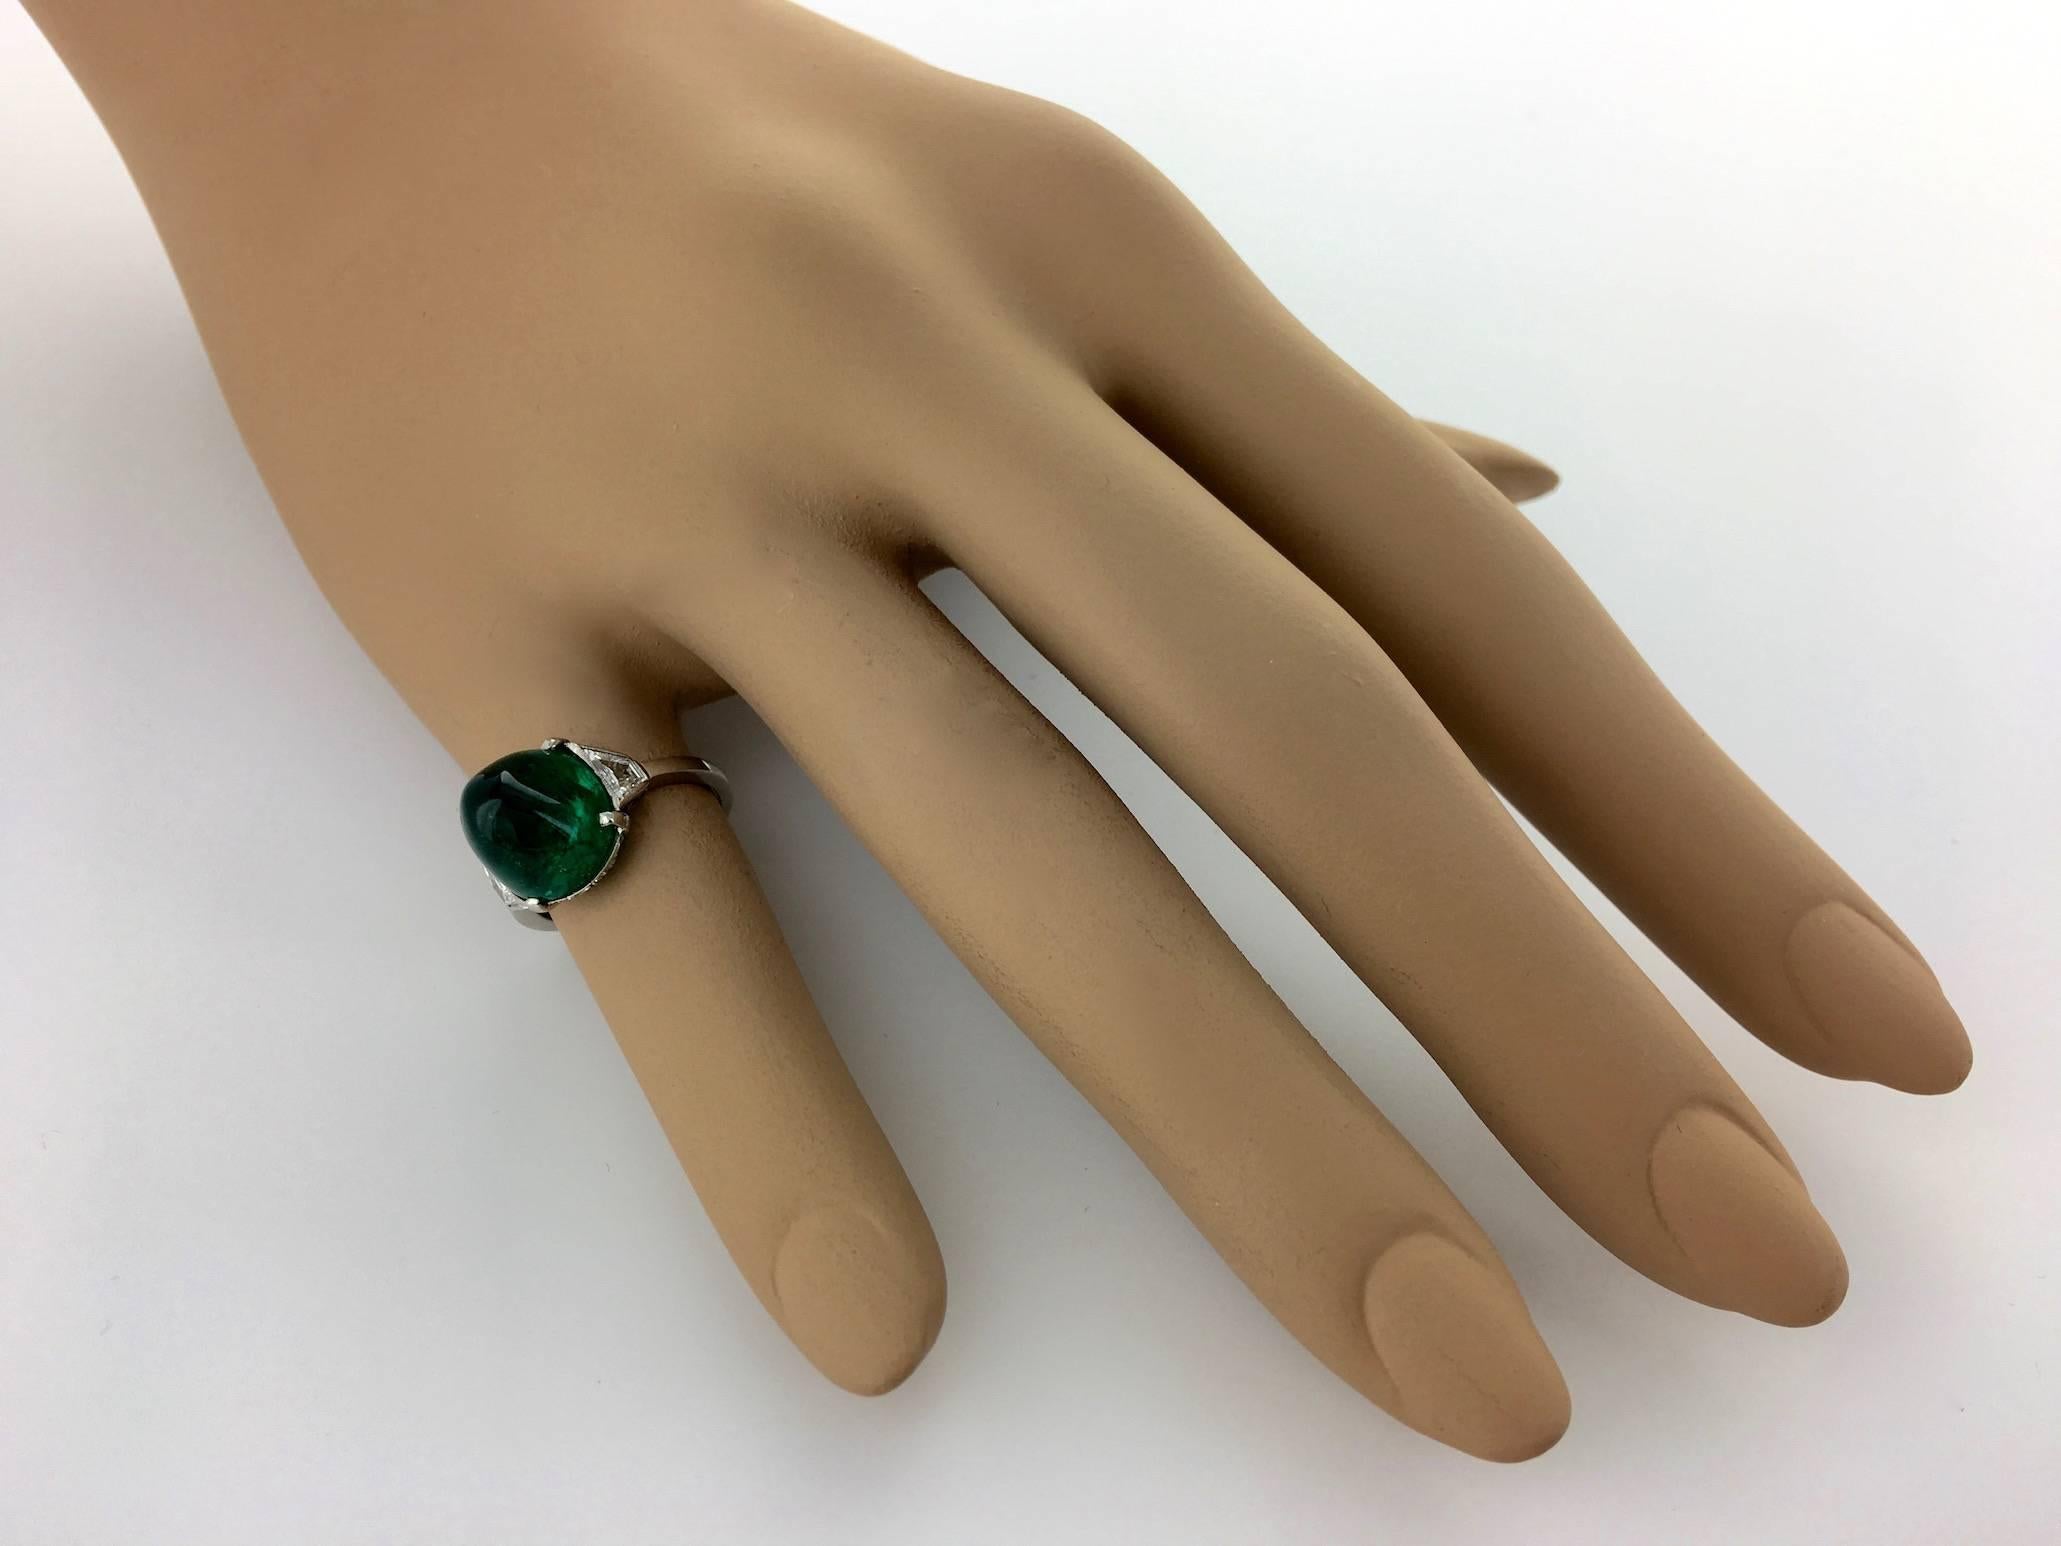 This Cabochon Sugarloaf Colombian Emerald has one of the most beautiful Green. Typically an Old mine color. Minor clarity enhancement.
(Gubelin Swiss Laboratory Report).
The mounting in Diamond and Platinum is Art Deco very Elegant and Simple in